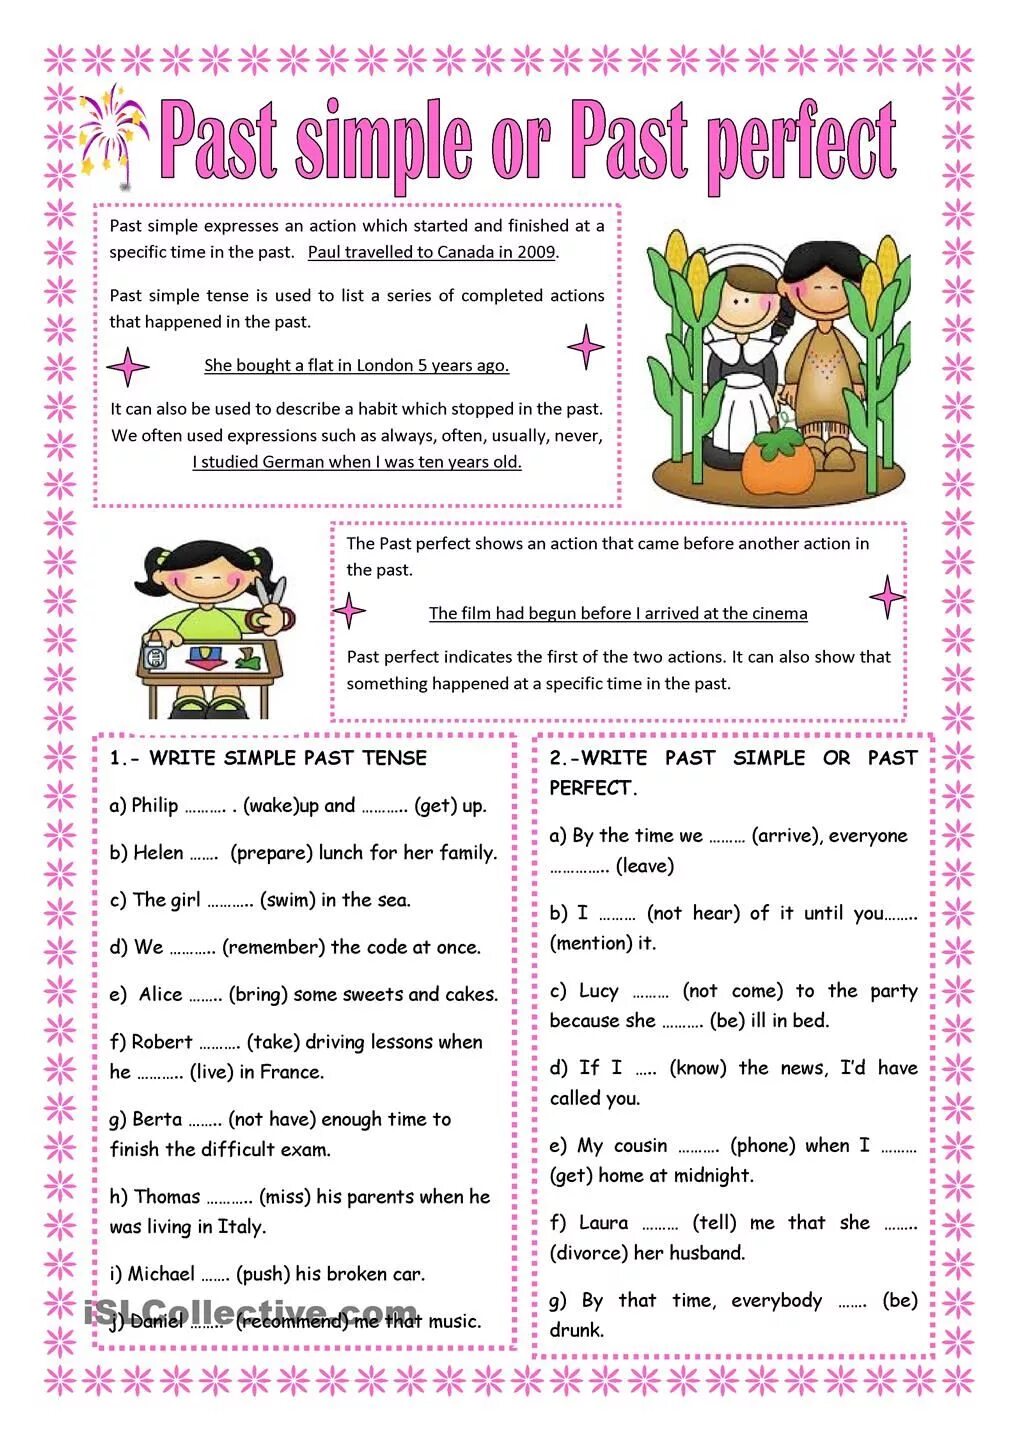 Past simple past perfect worksheets pdf. Past simple vs past perfect Worksheets. Present perfect vs past simple exercise. Present perfect past simple упражнения. Past simple present perfect past perfect упражнения.